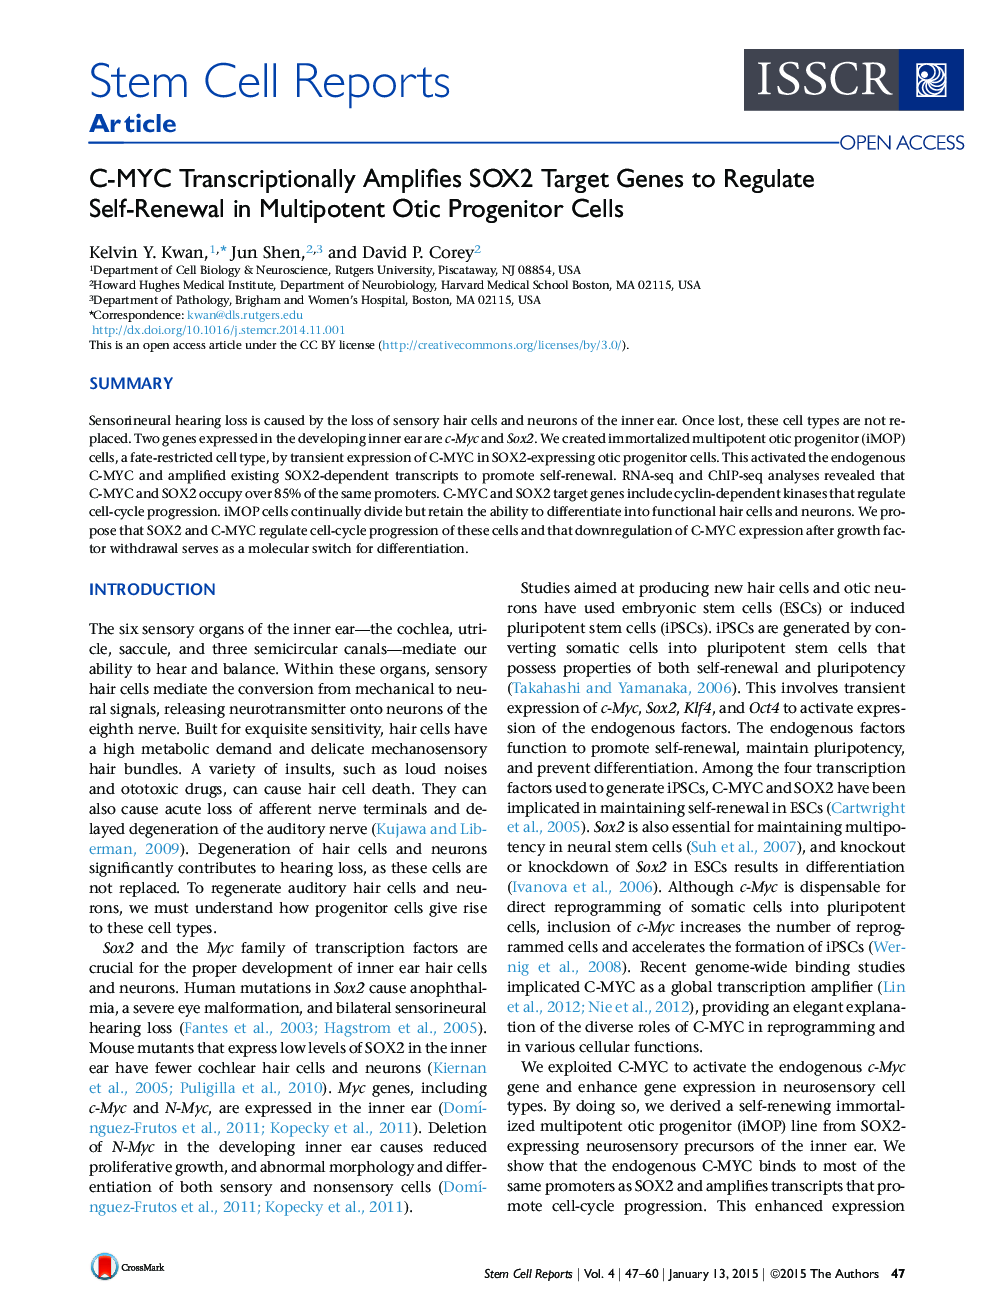 C-MYC Transcriptionally Amplifies SOX2 Target Genes to Regulate Self-Renewal in Multipotent Otic Progenitor Cells 